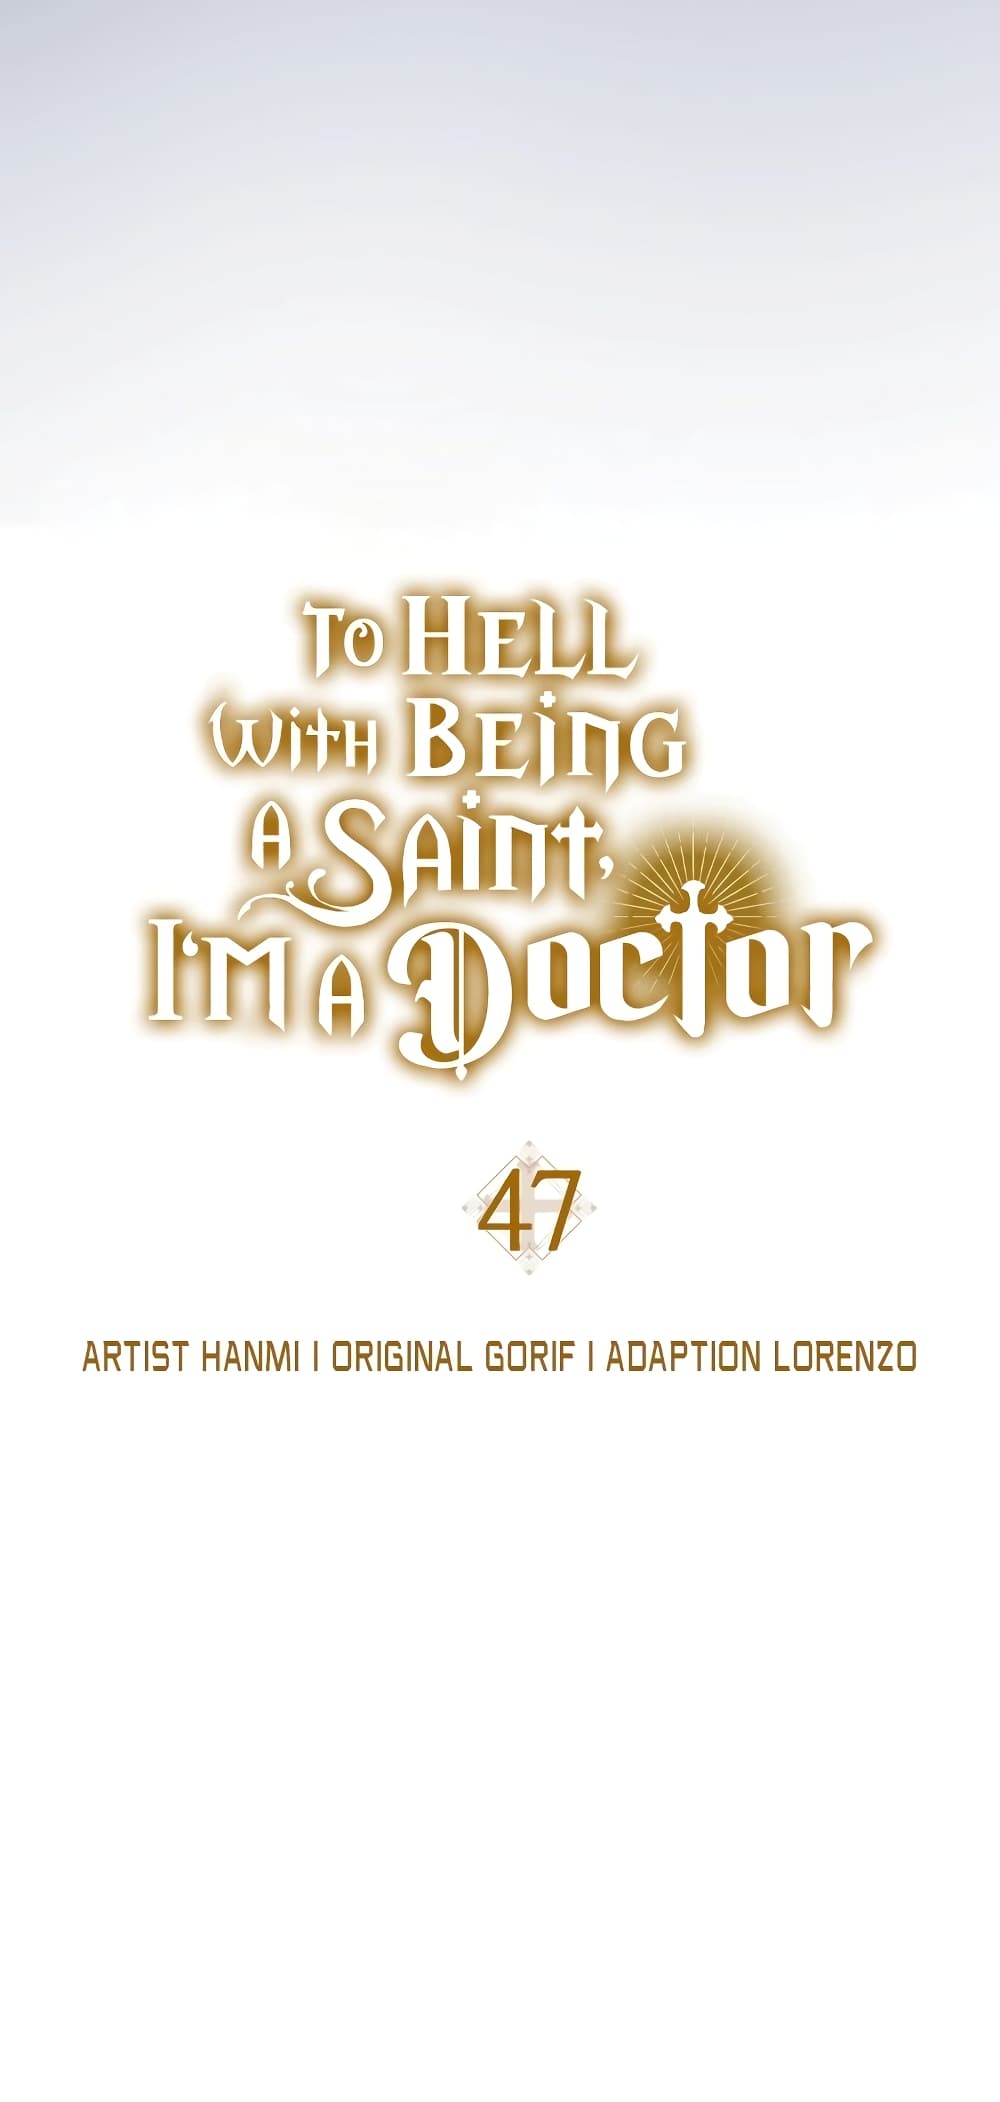 To Hell With Being A Saint, I’m A Doctor 47-47